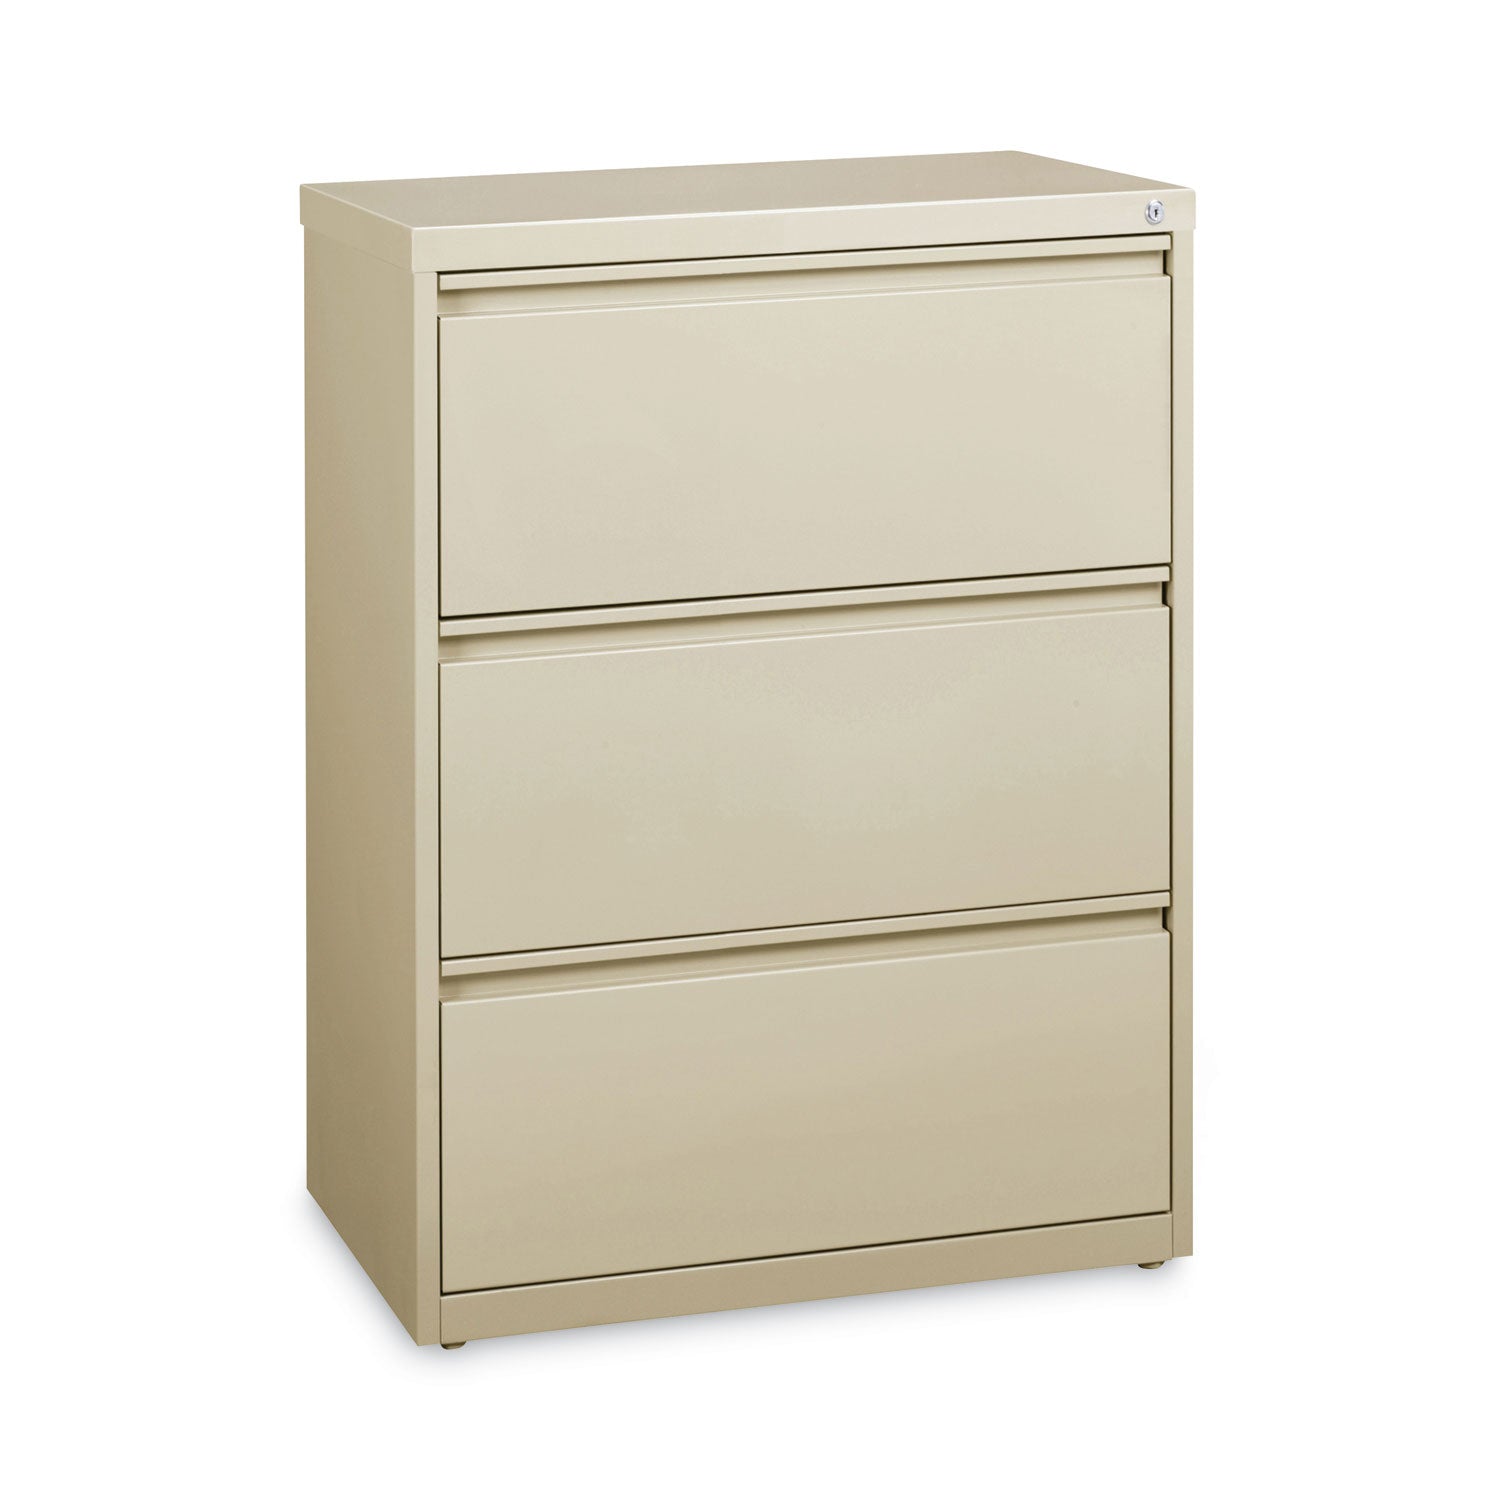 lateral-file-cabinet-3-letter-legal-a4-size-file-drawers-putty-30-x-1862-x-4025_hid14973 - 1